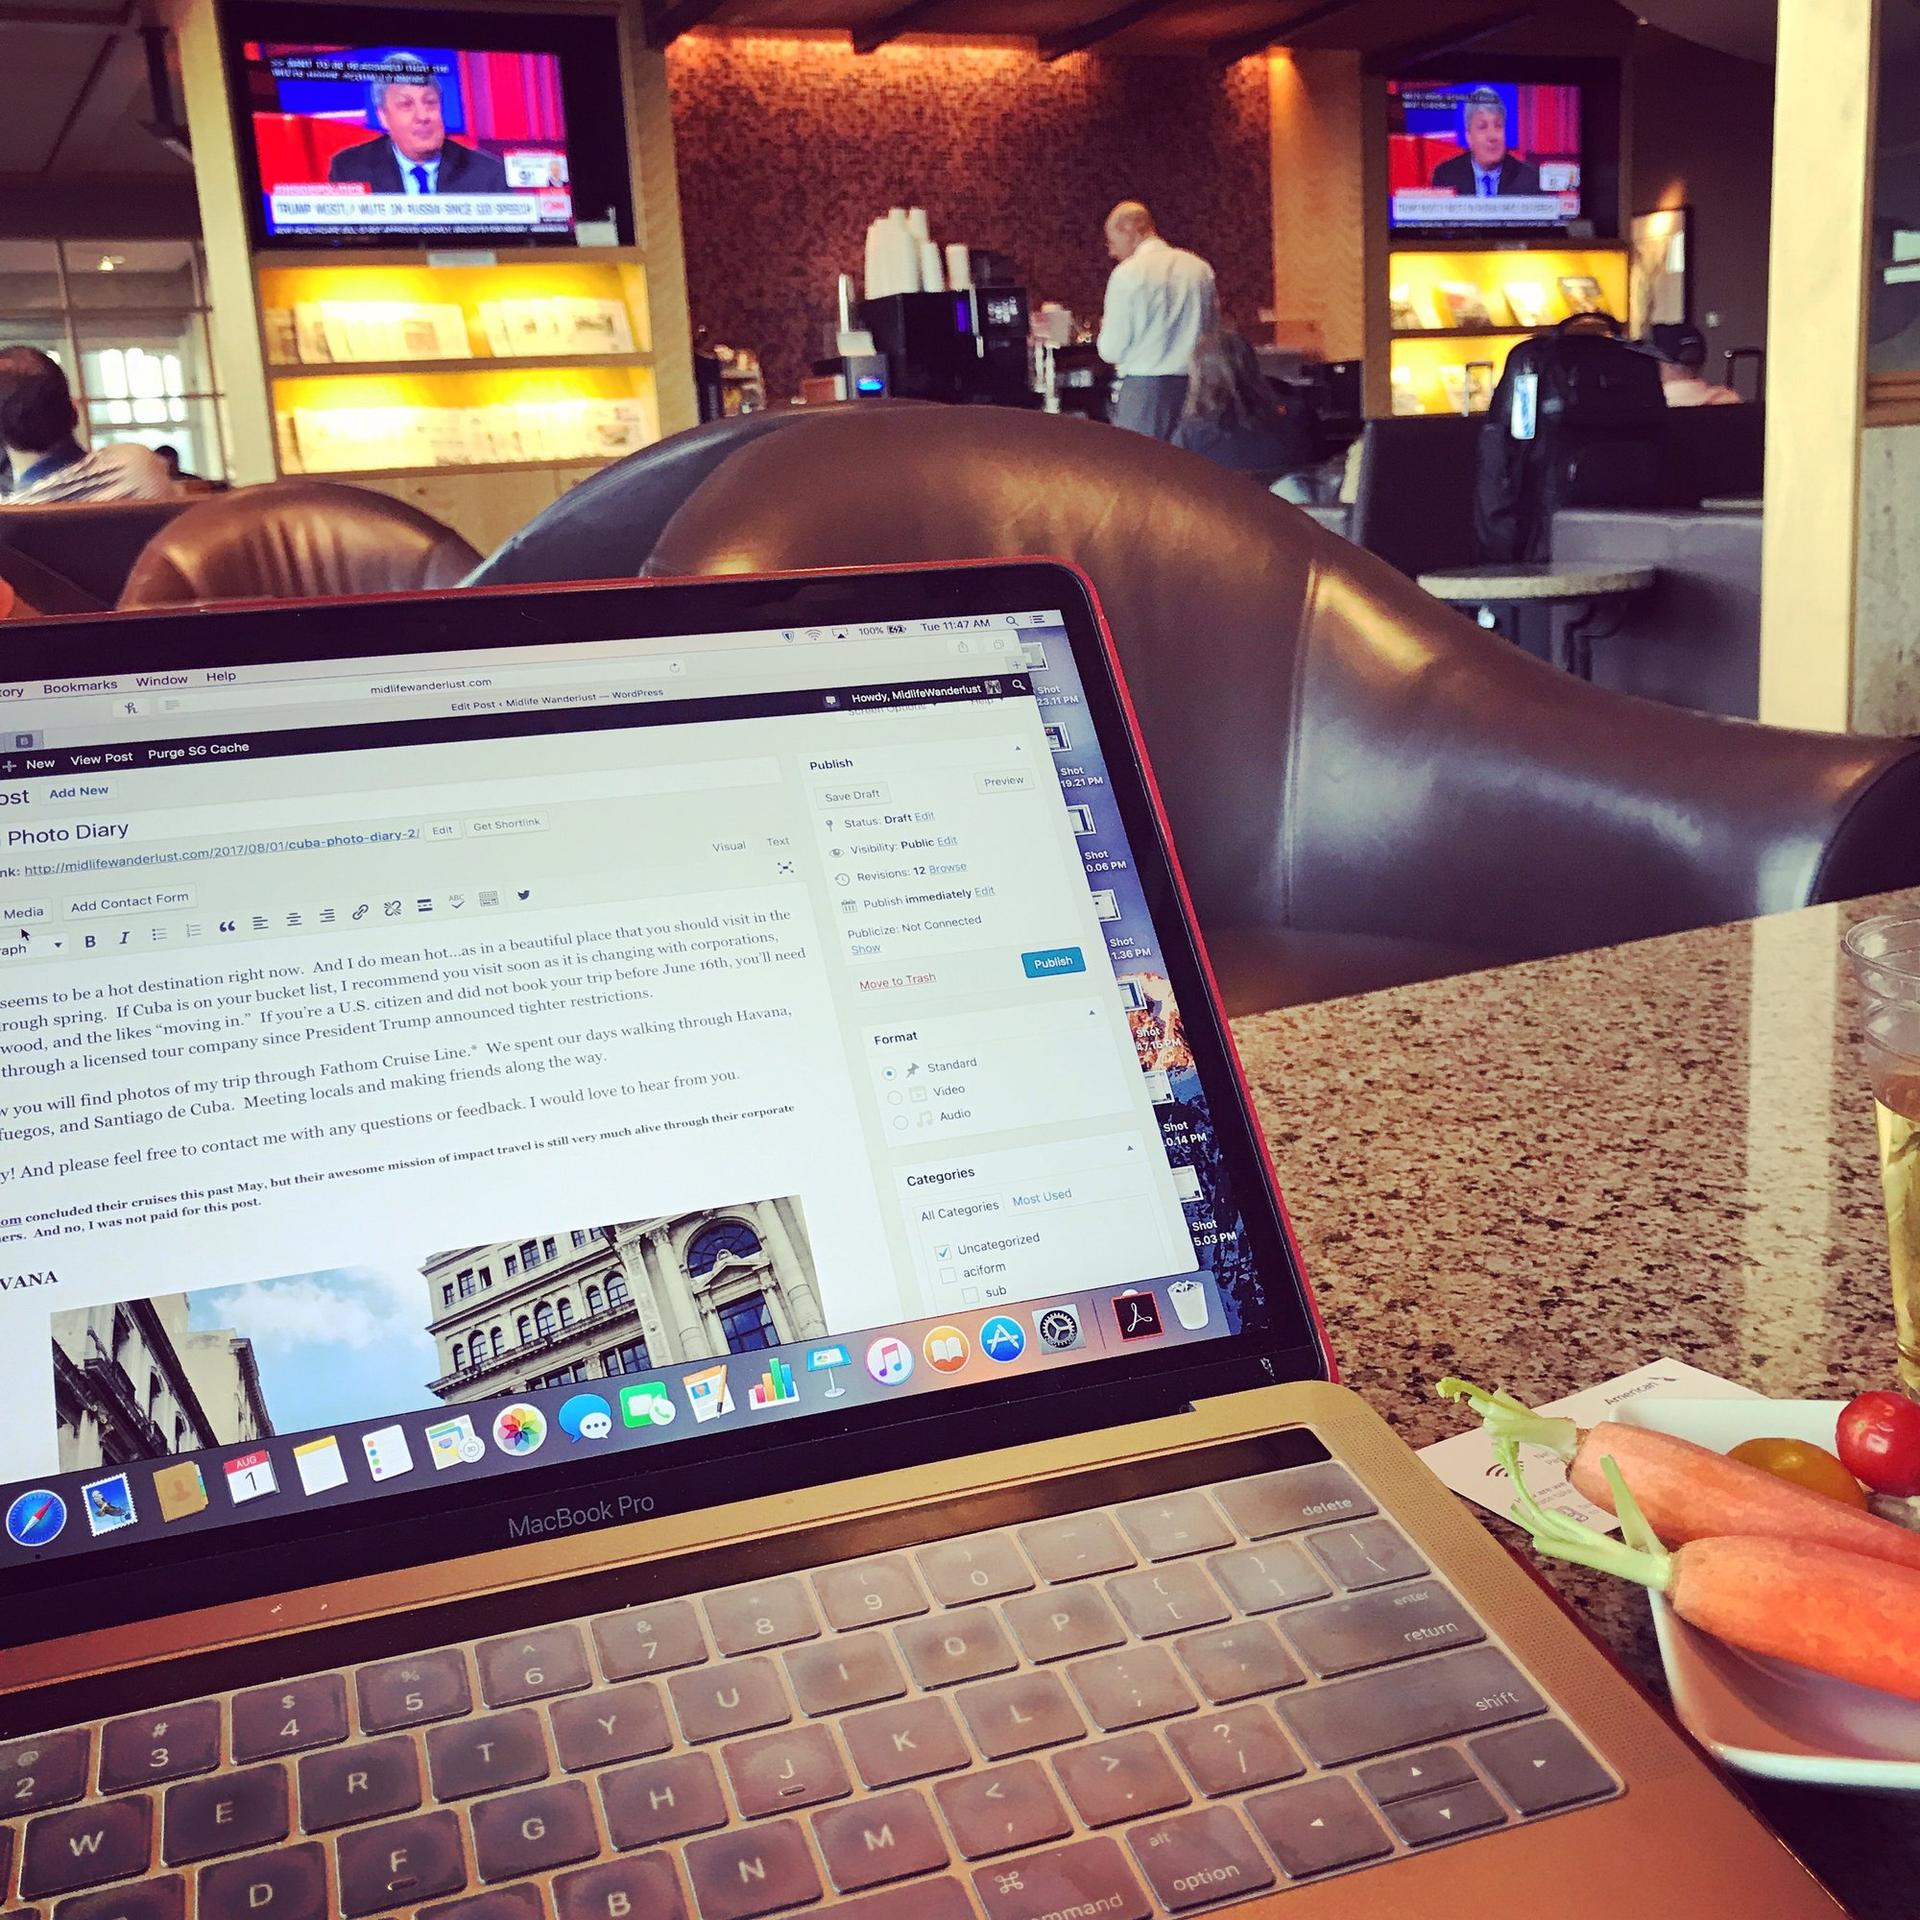 American Airlines Admirals Club image 9 of 14